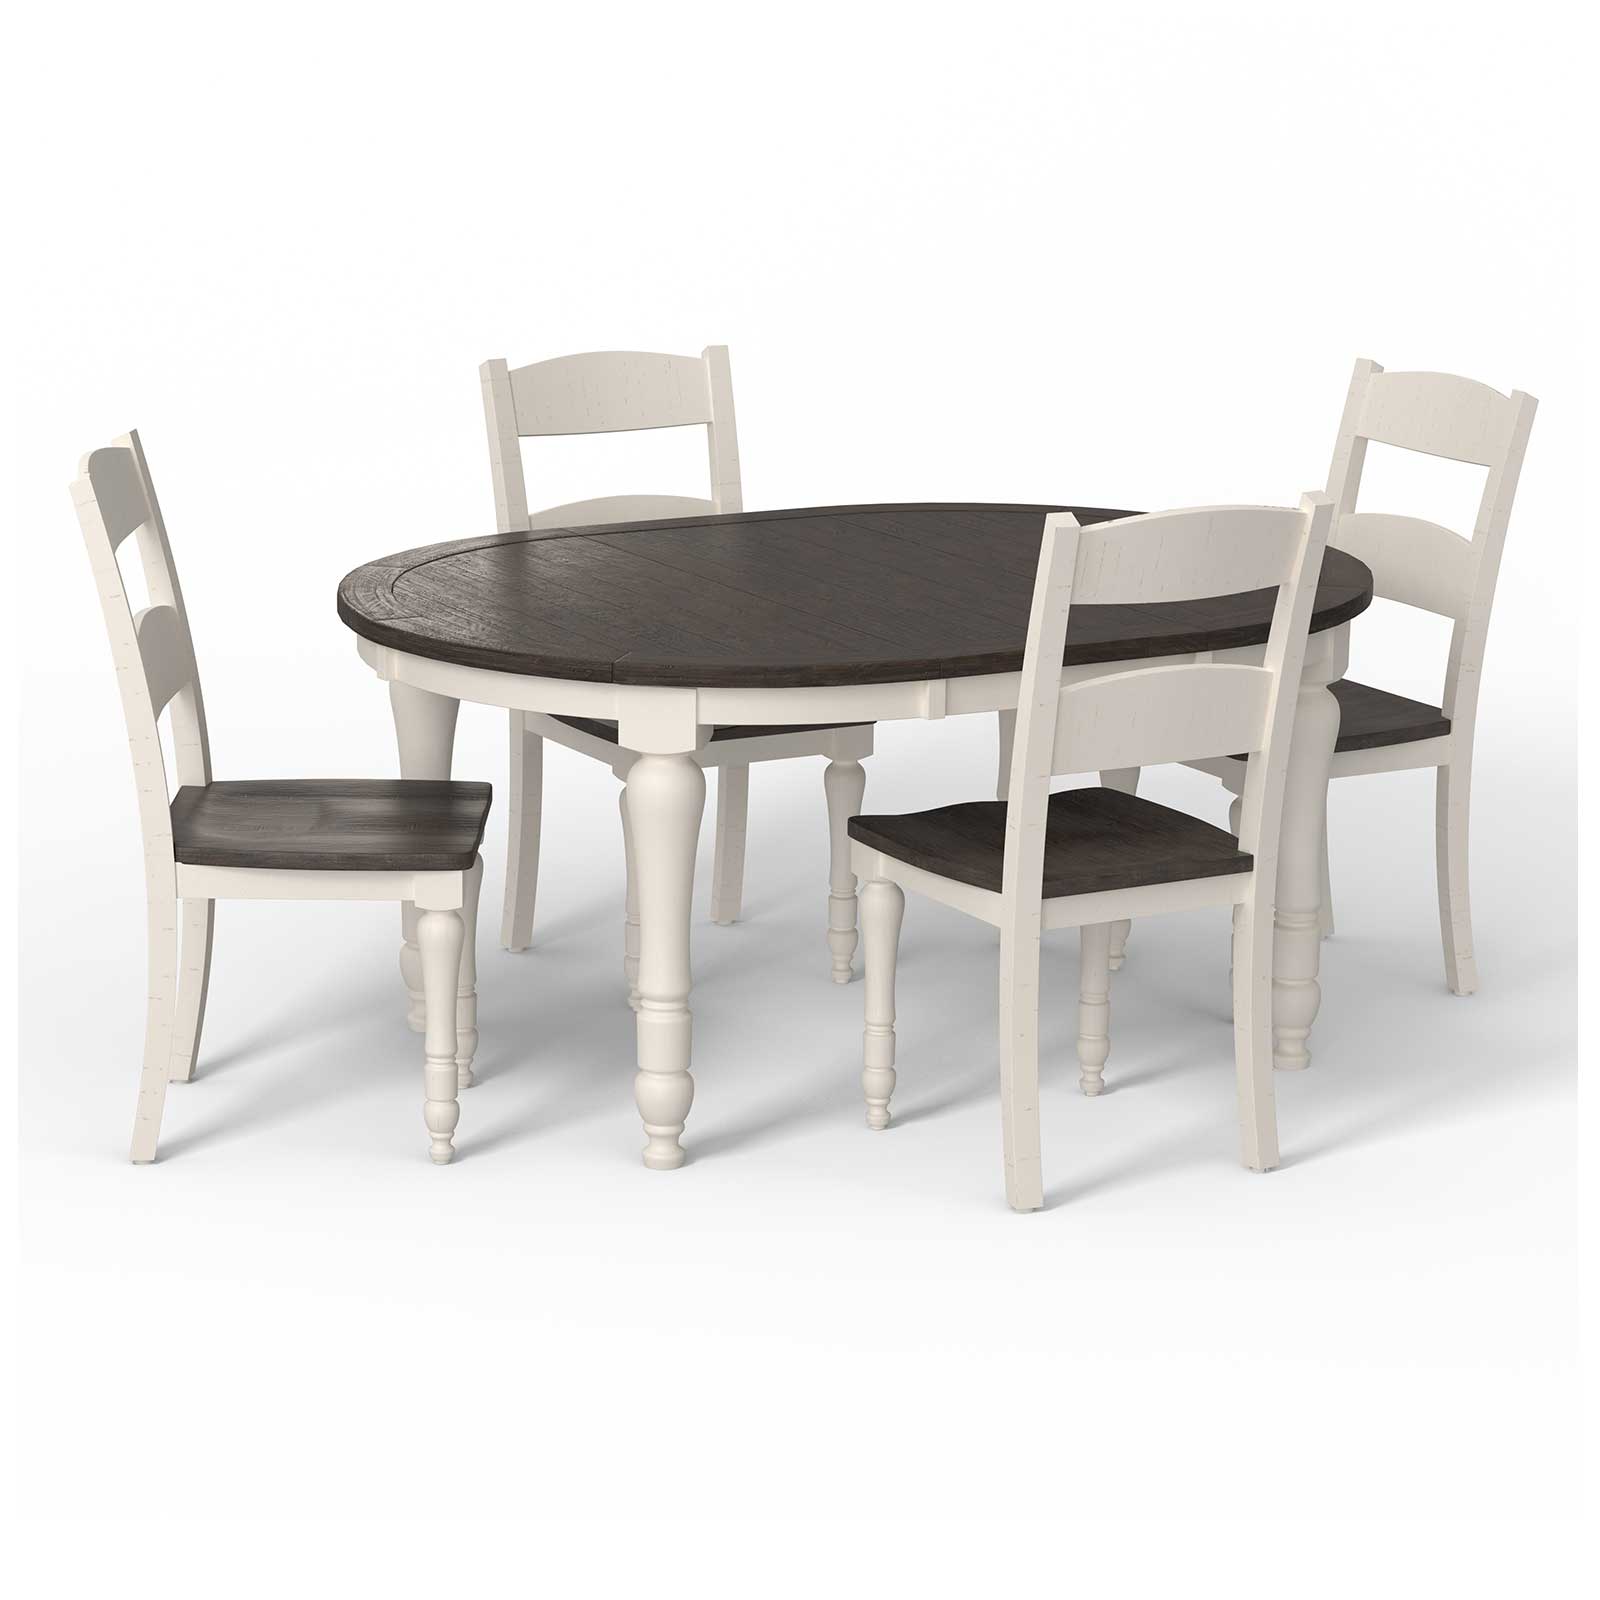 Jofran Madison County Oval Dining Table & 4 Chairs